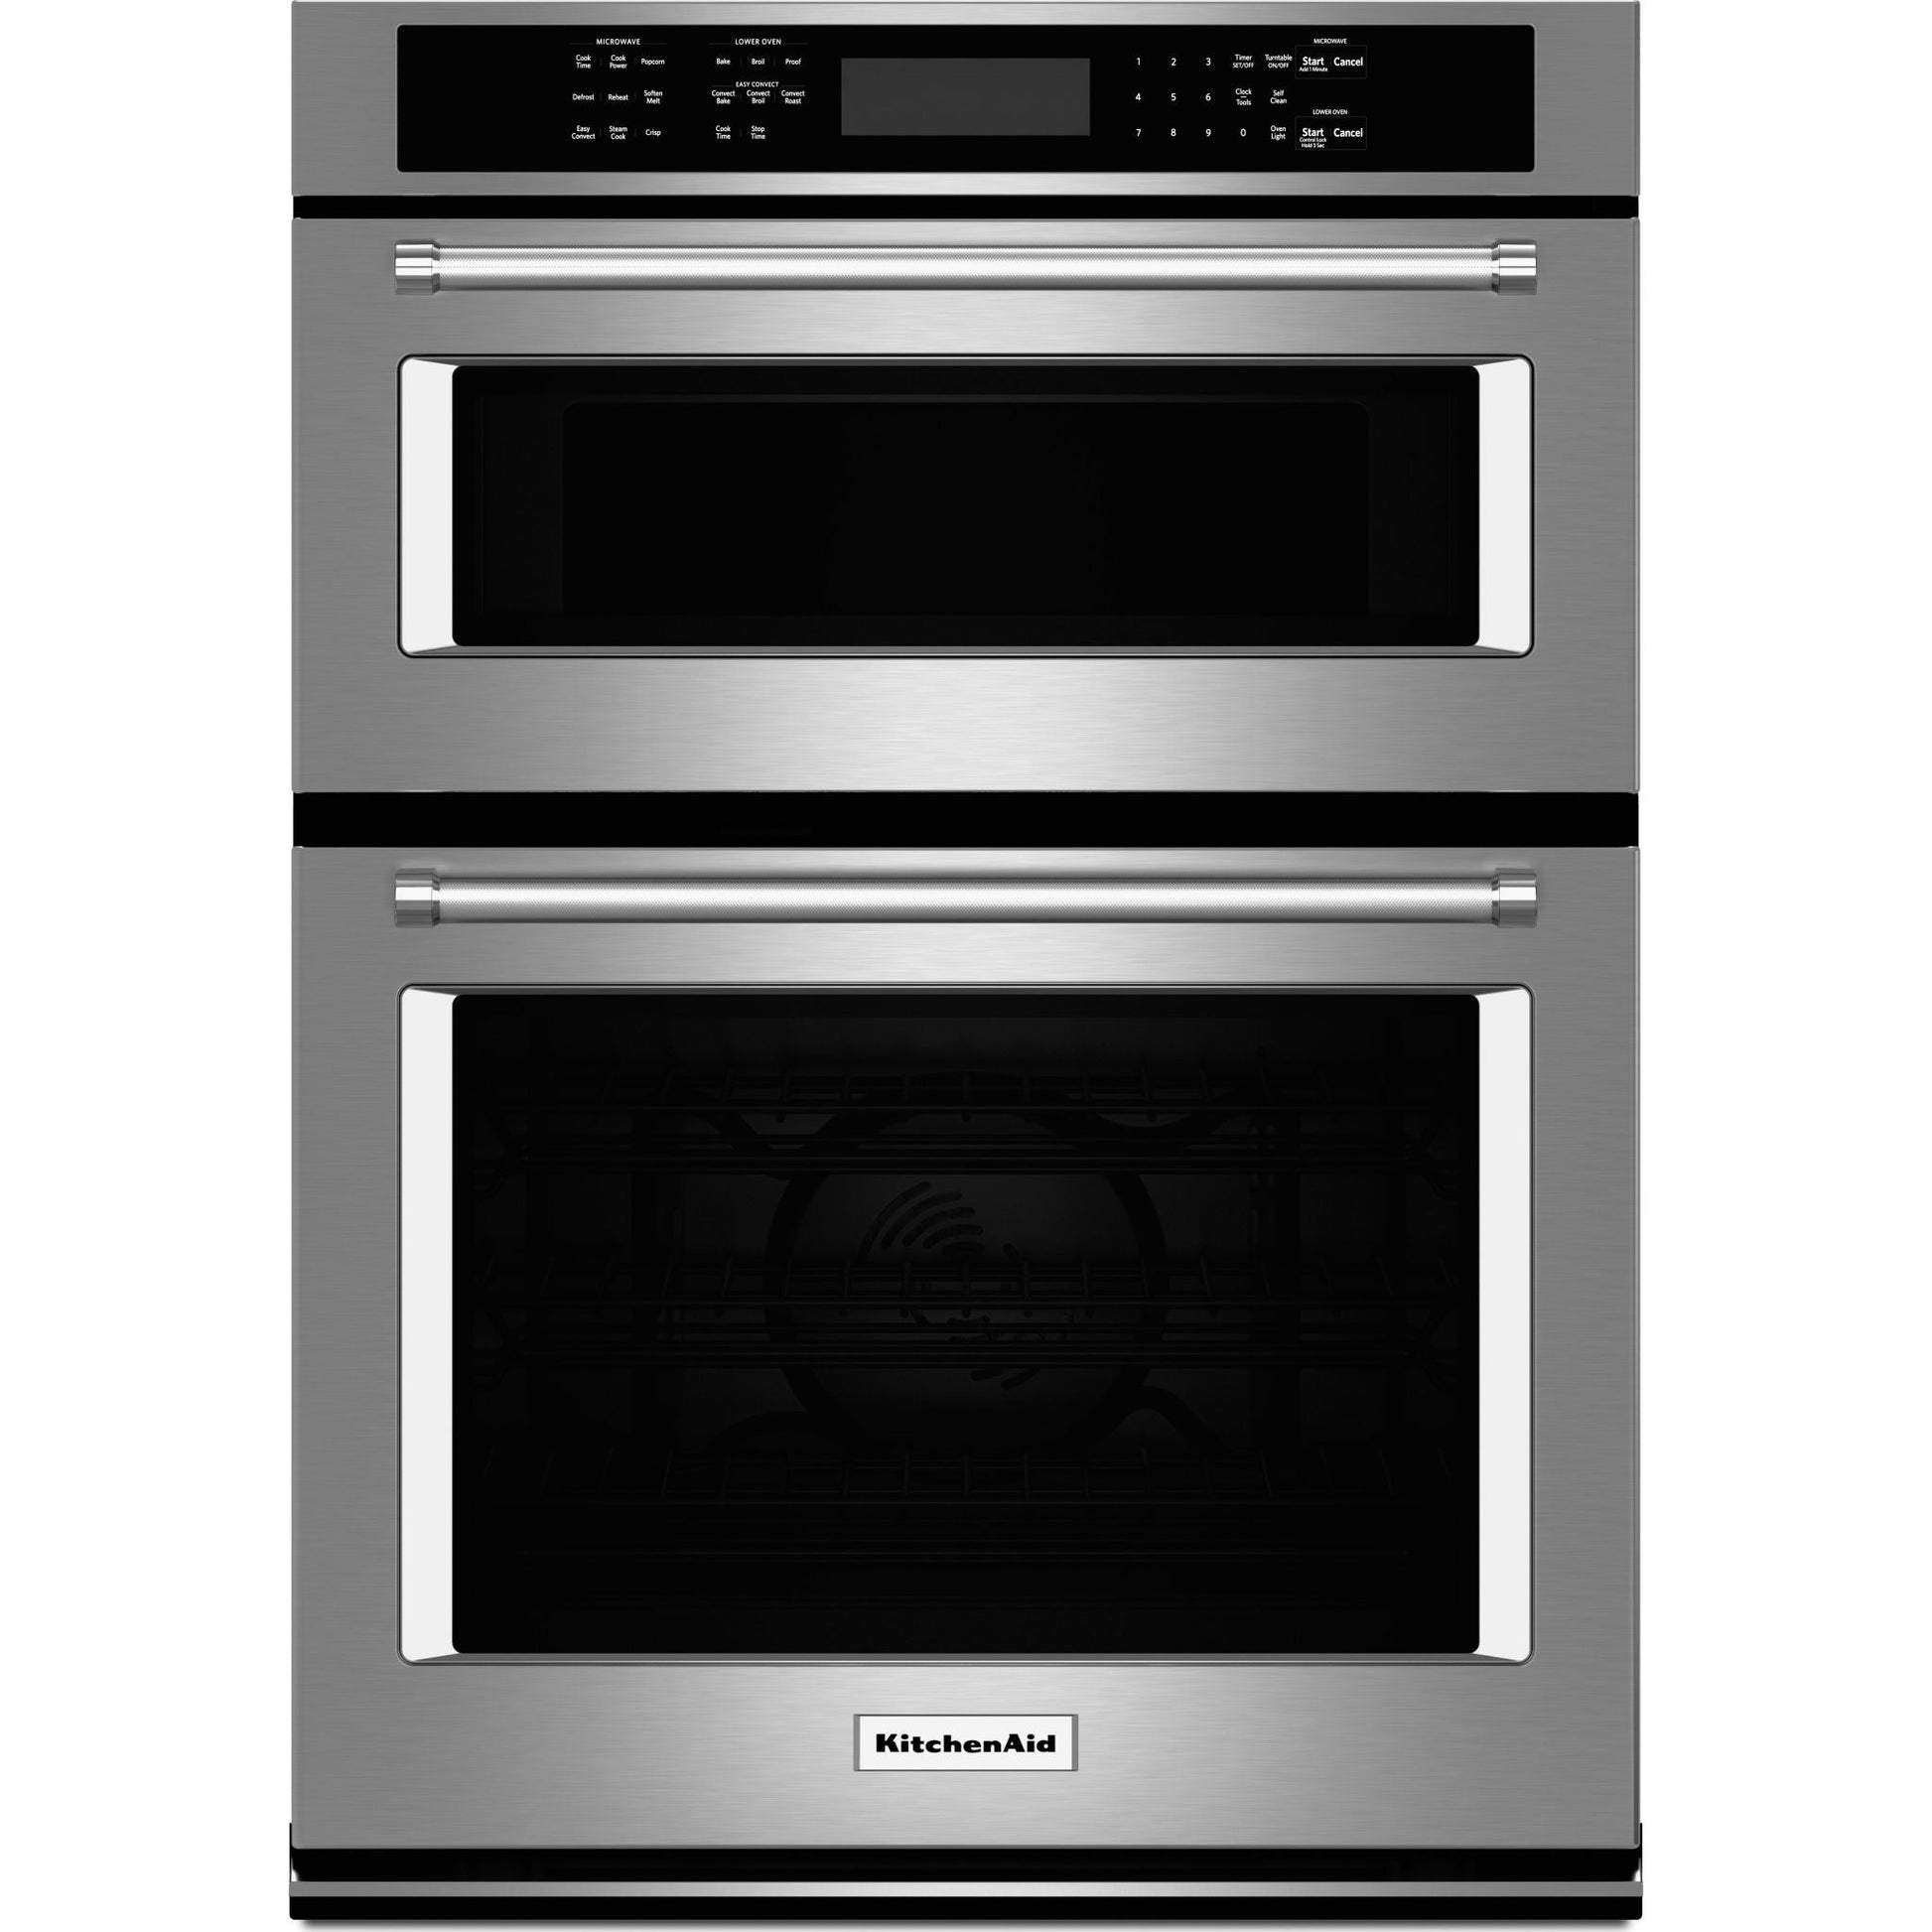 KitchenAid Microwave Wall Oven (KOCE500ESS) - Stainless Steel